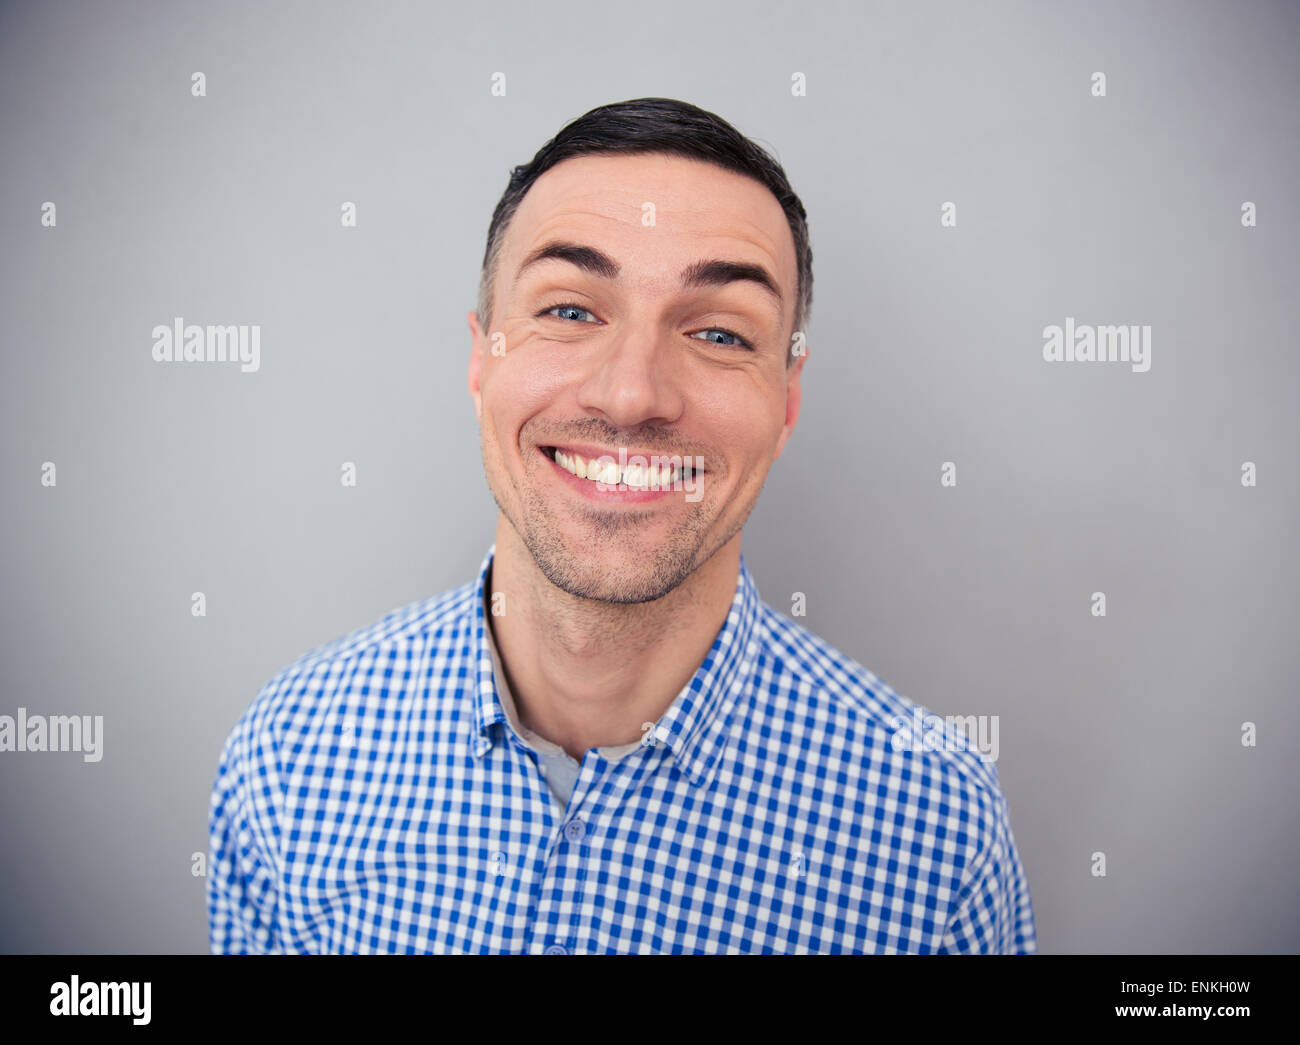 Portrait of a happiness man looking at camera over gray background Stock Photo